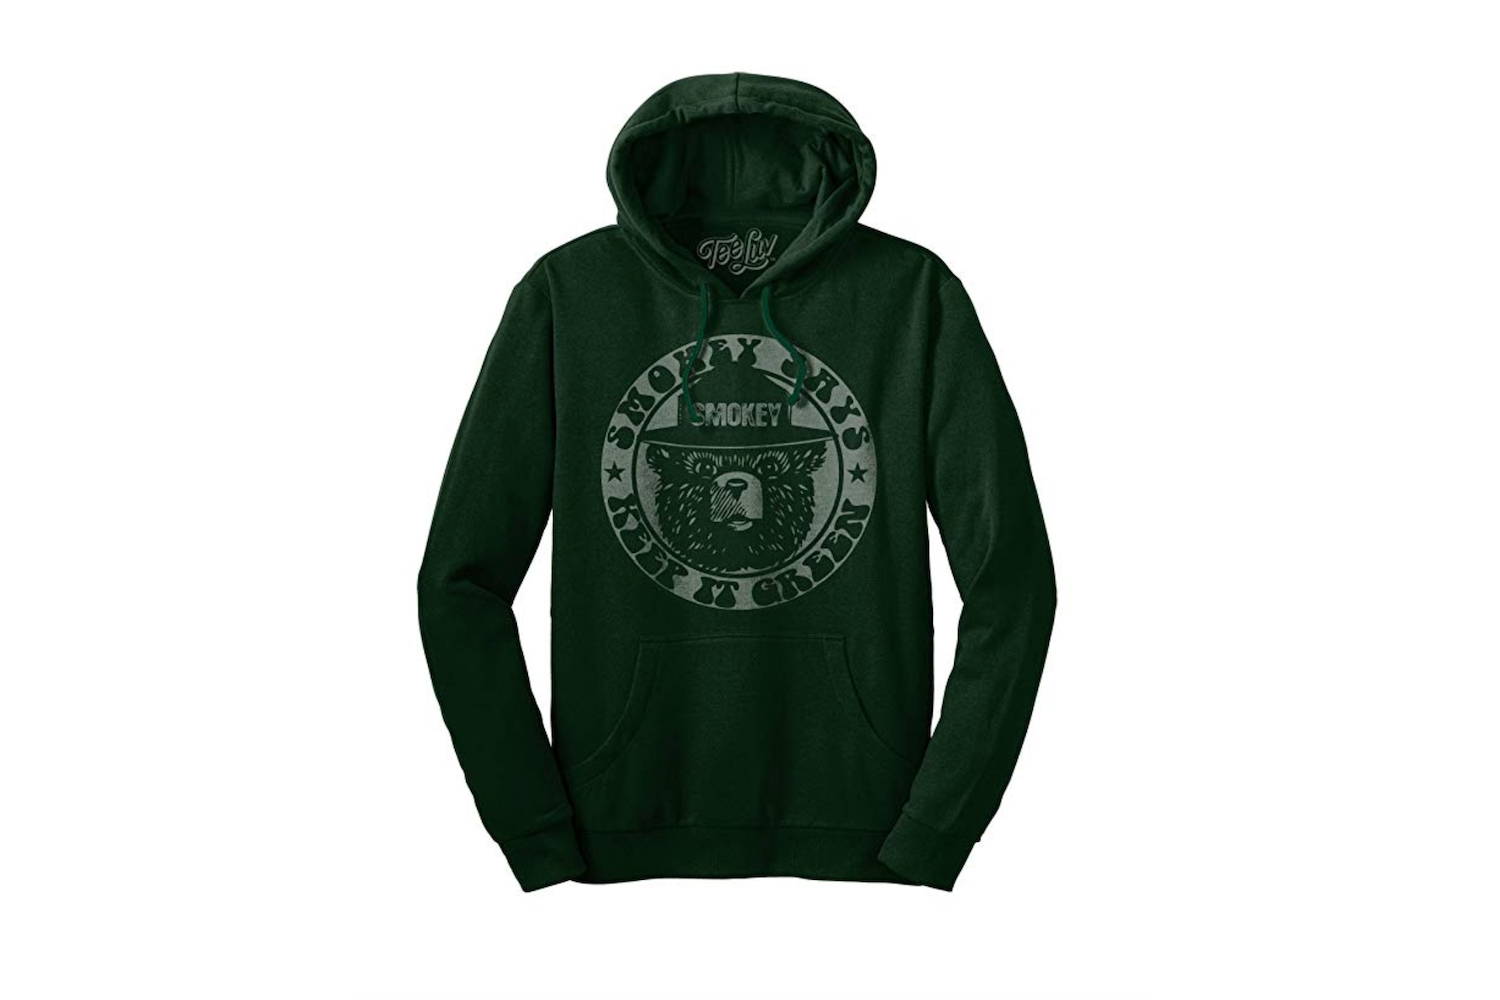 summer high sweatsuit relaxation relax weed marijuana joint rastafarian colorful high cotton hooded Beach & Weed  hoodie